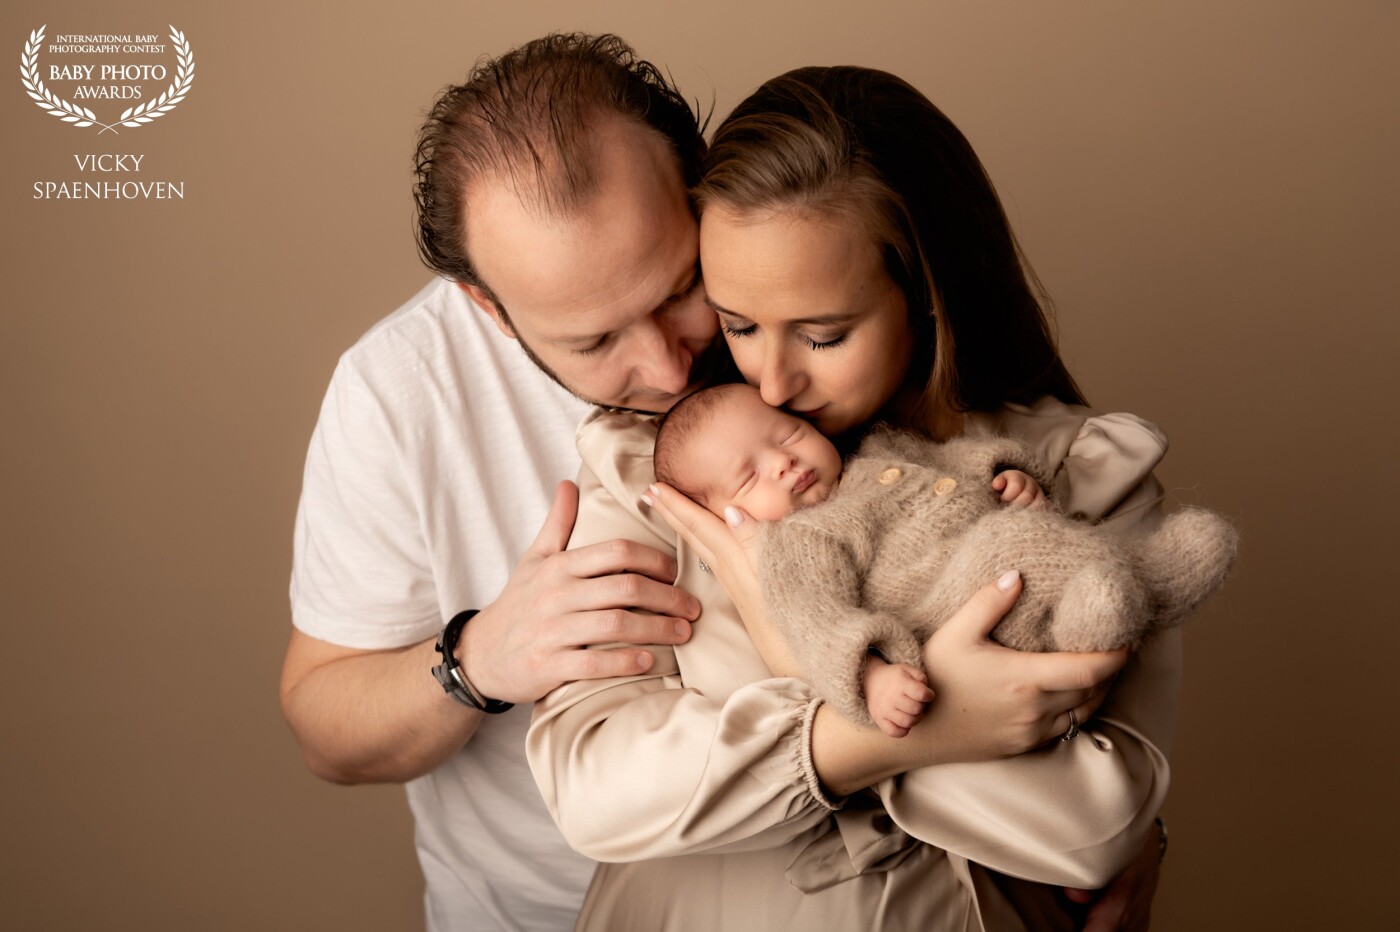 Beautiful mom and dad with their sweet girl Olivia. I love the warm and soft color tones in this picture. A tender moment that will last forever.